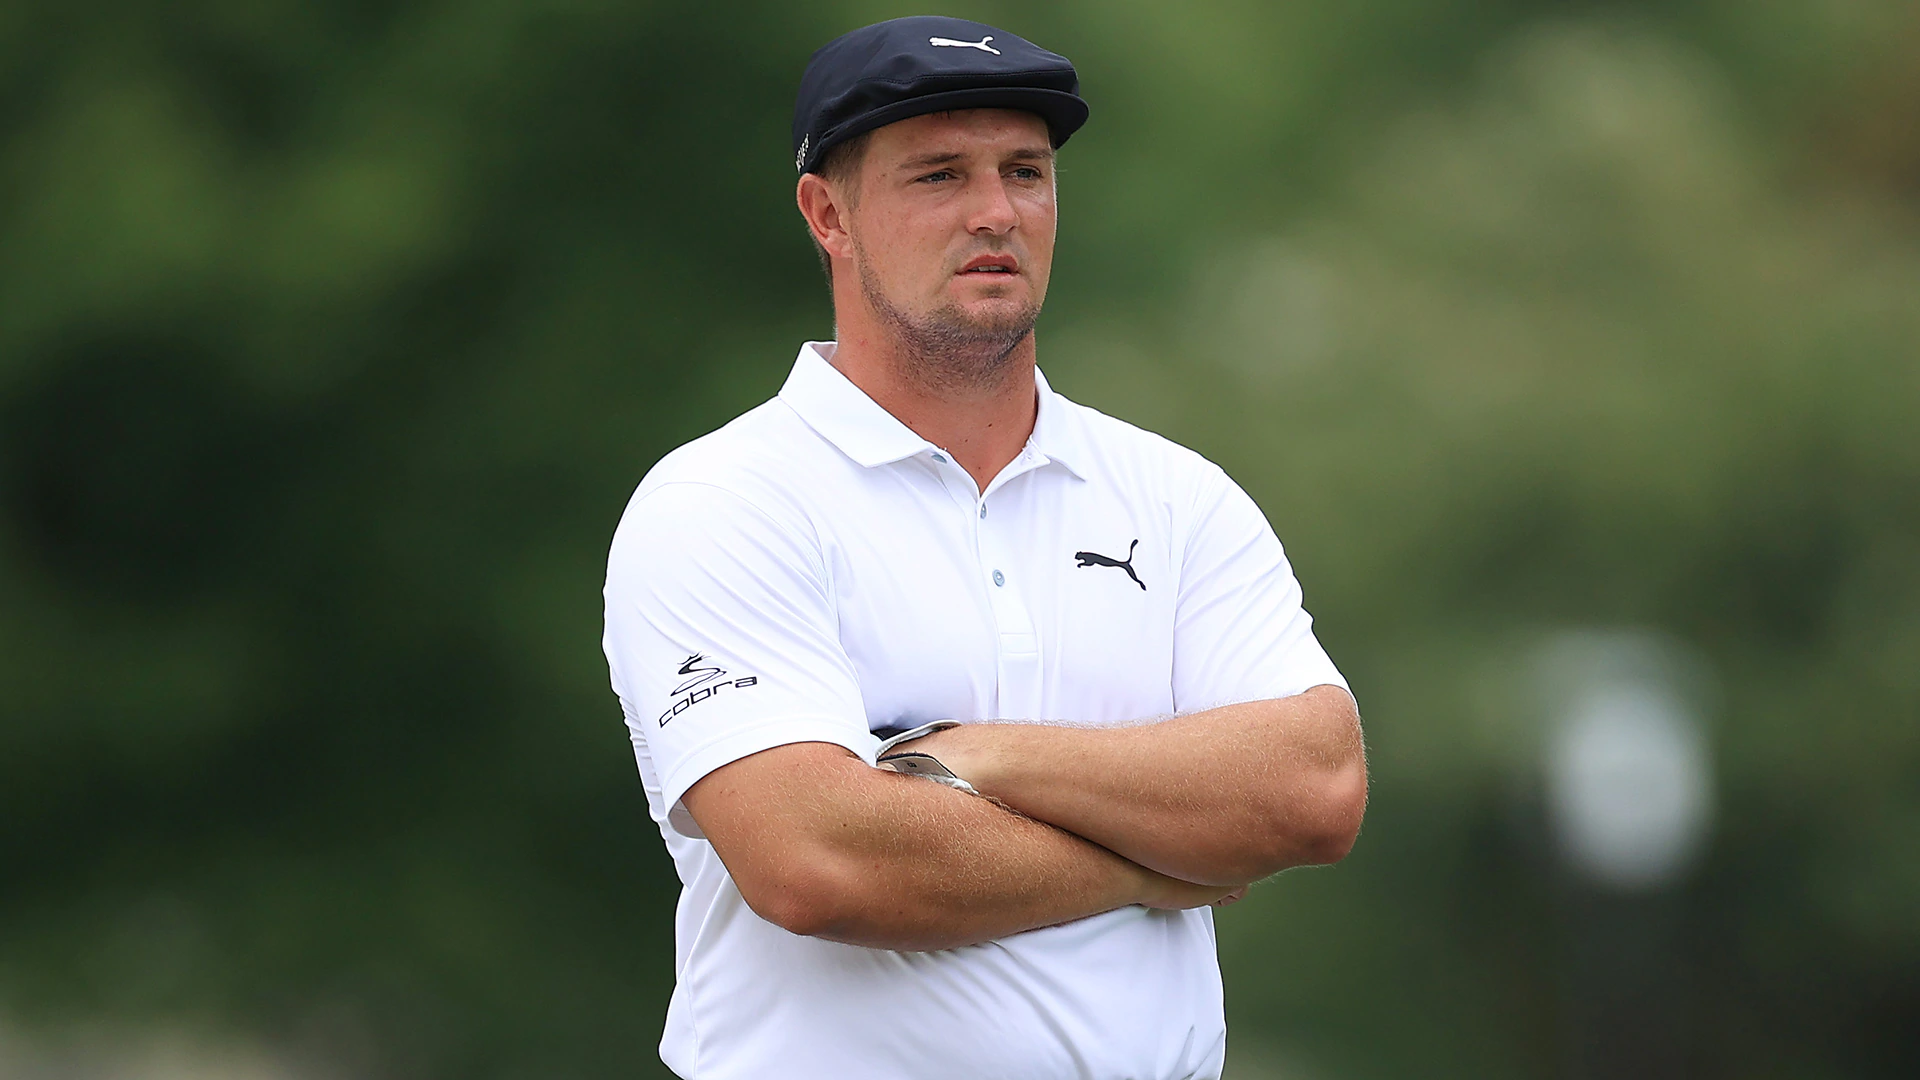 Bryson DeChambeau on rules snafu on Day 1 in Memphis: ‘It is what it is’